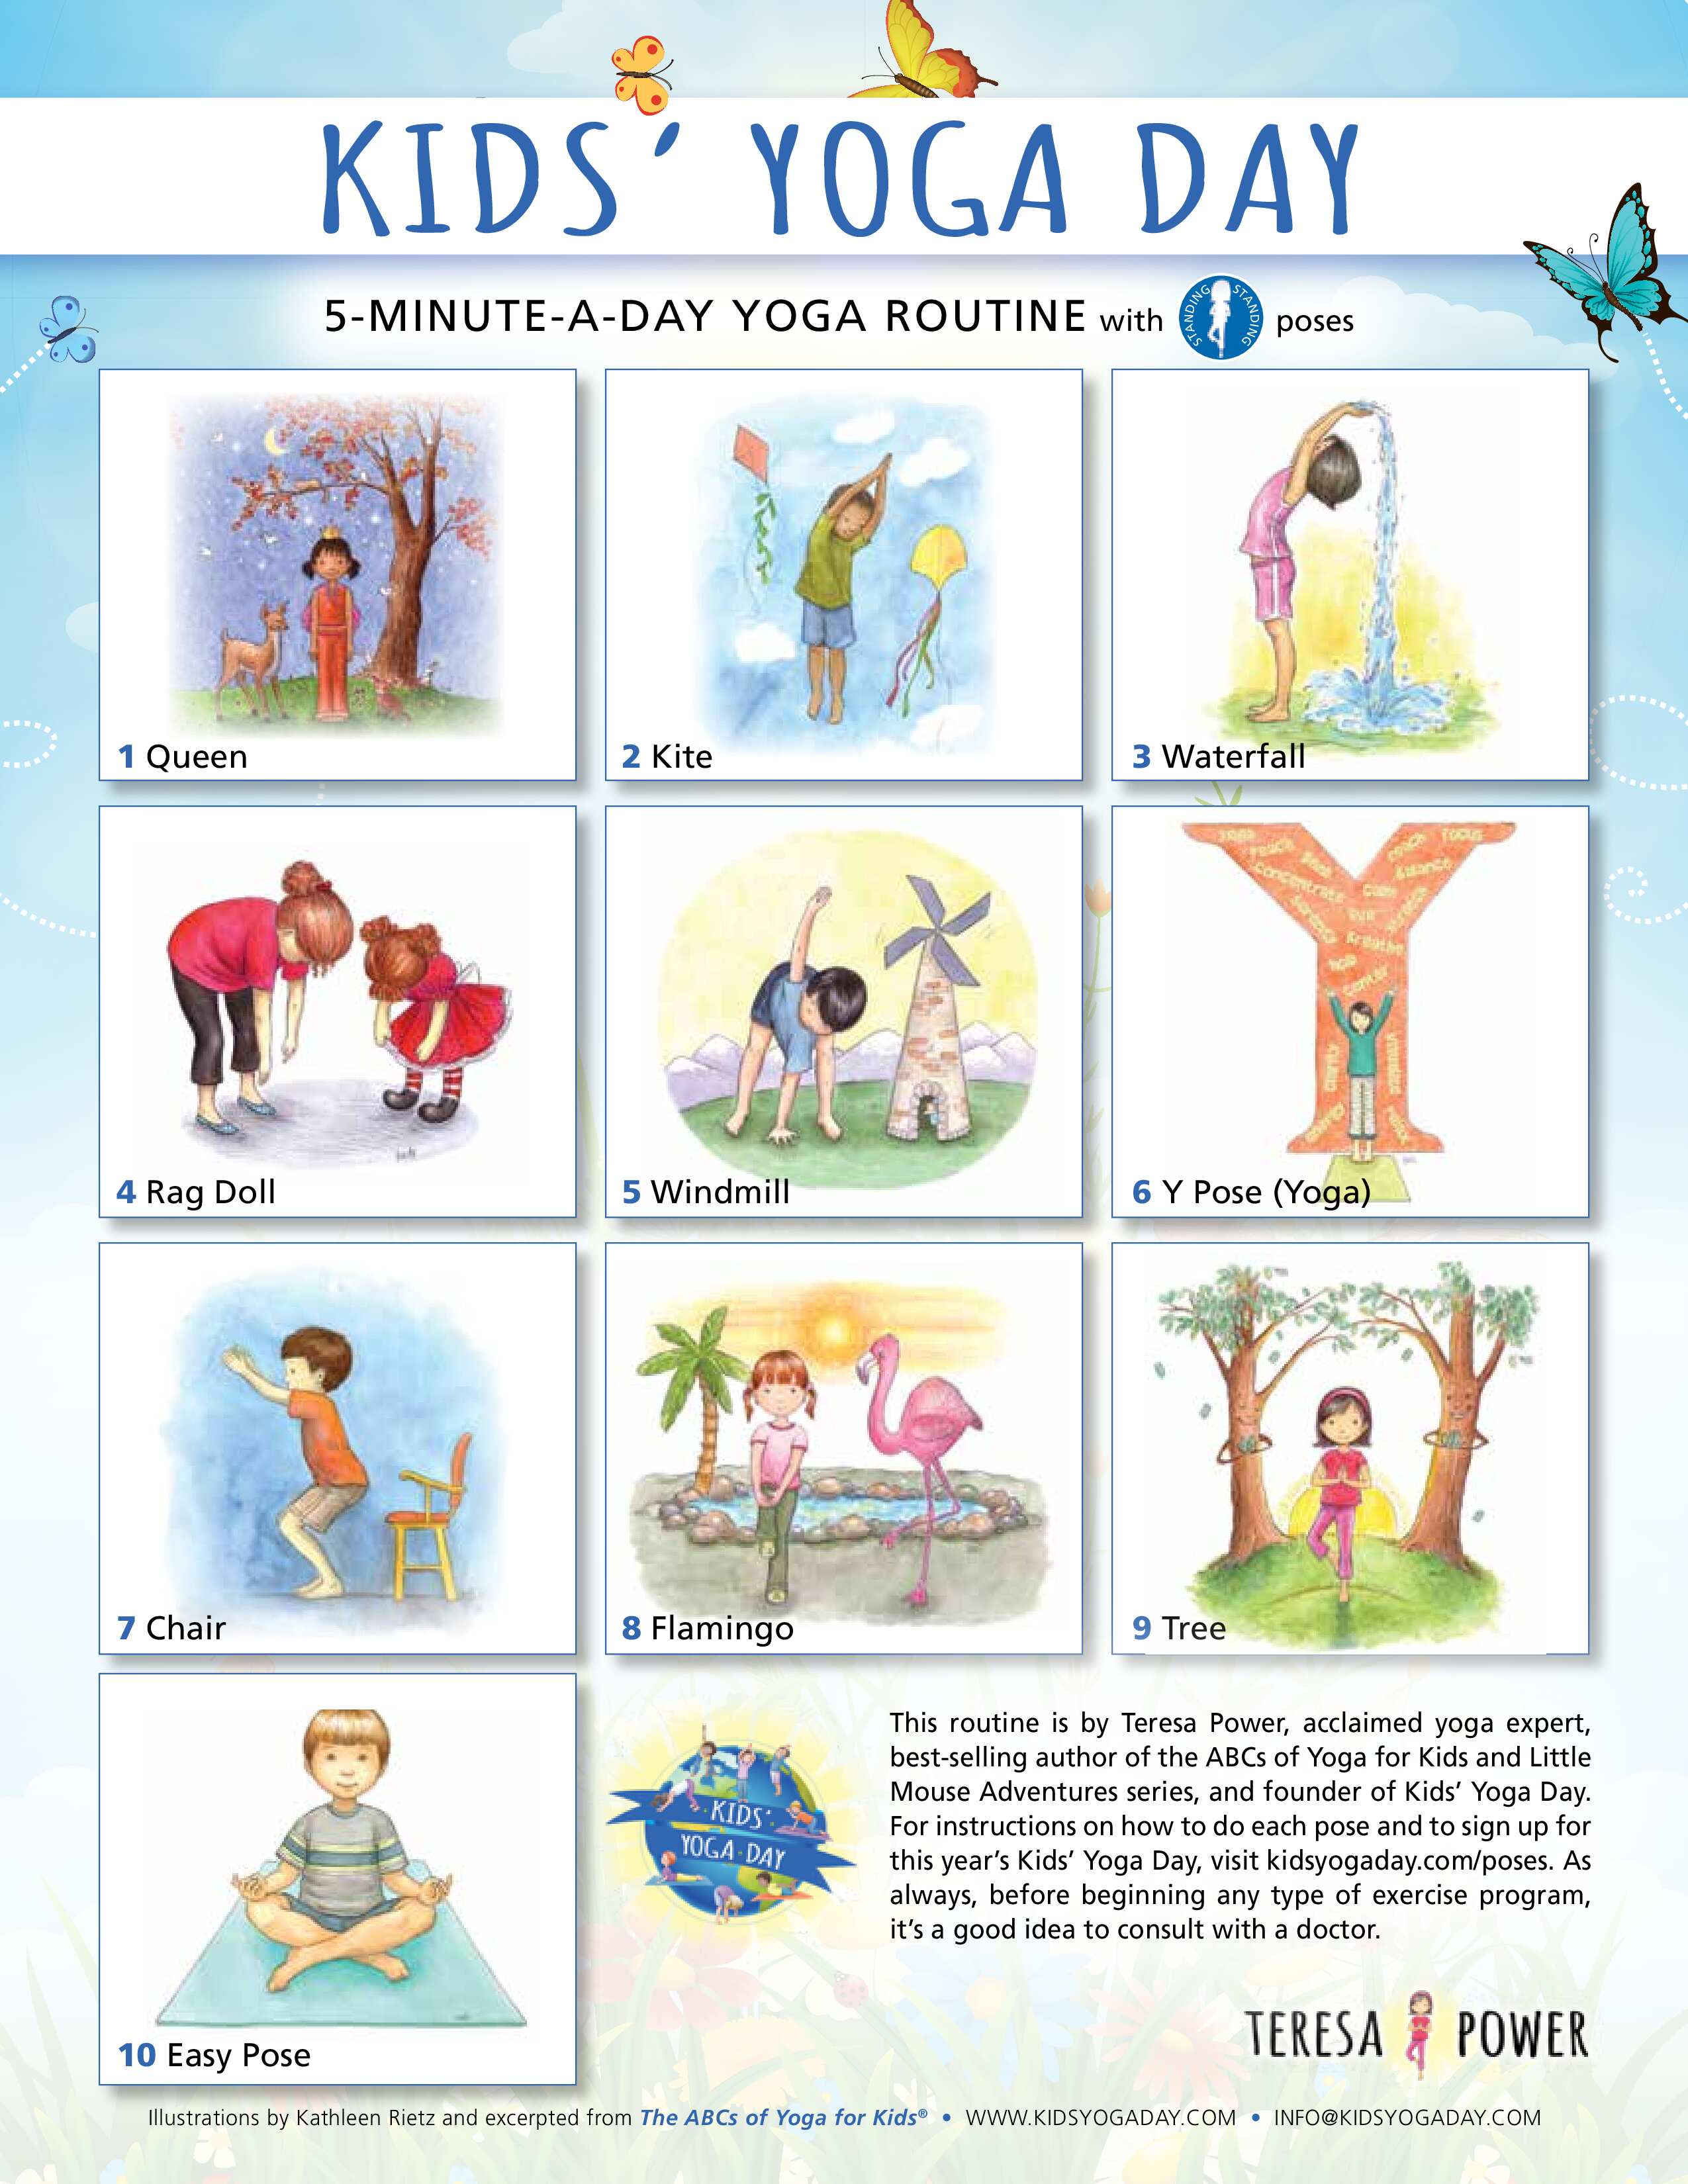 6 Yoga Poses for Kids to Get Active | LoveToKnow Health & Wellness